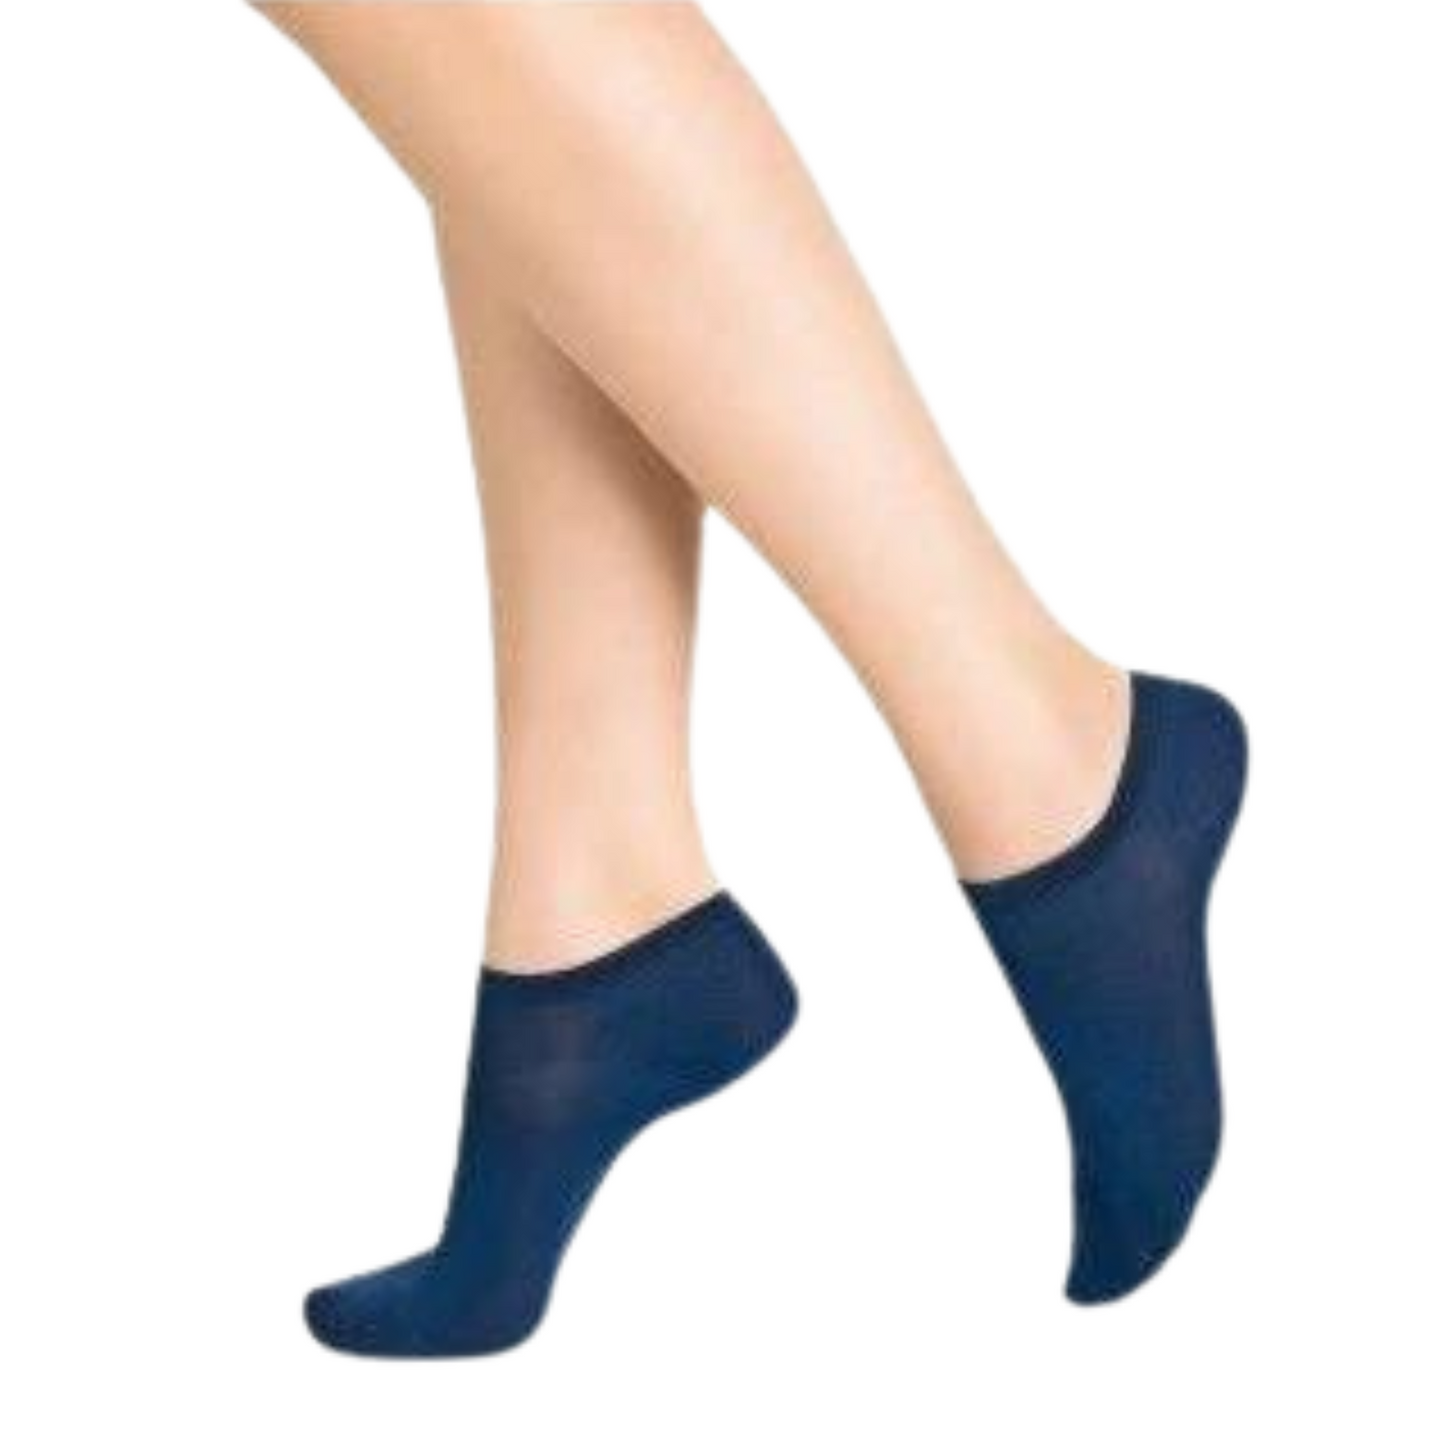 A pair of low cut ankle height socks in blue is pictured.